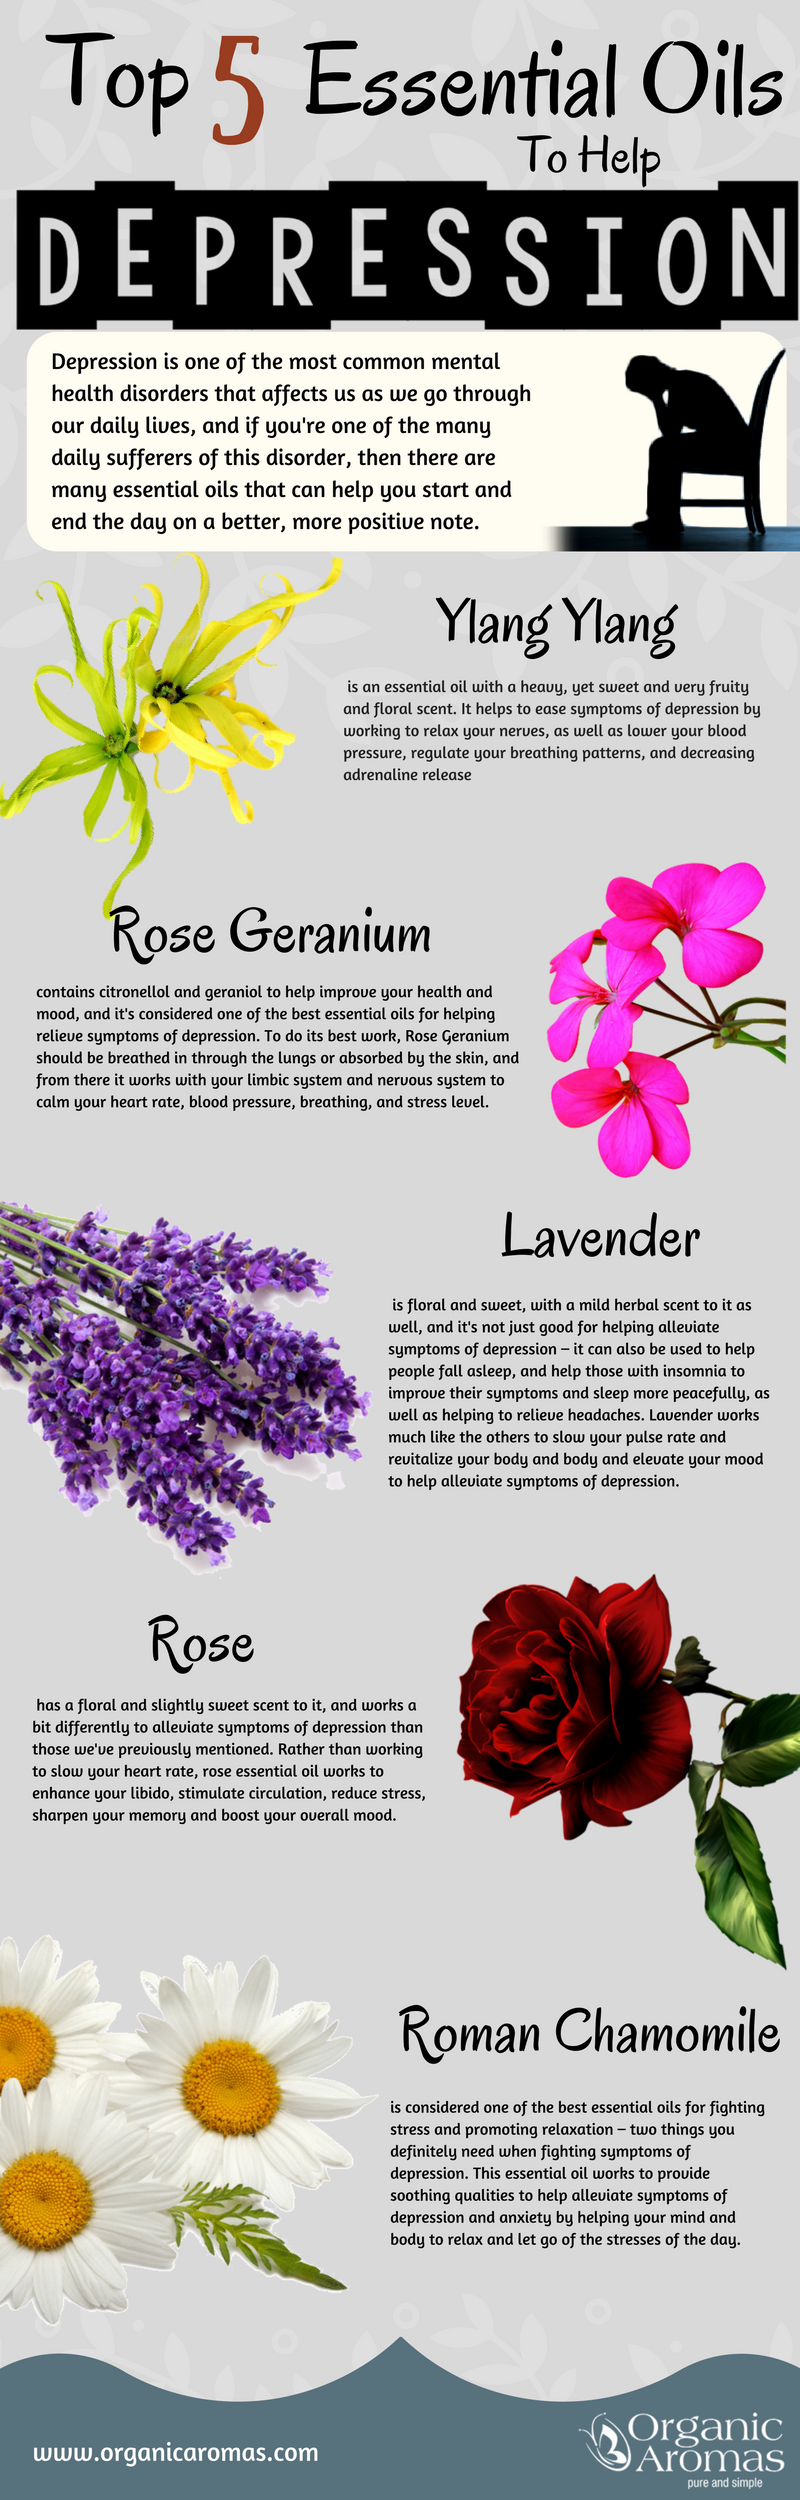 Top 5 Essential Oils For Treating Depression Infographic